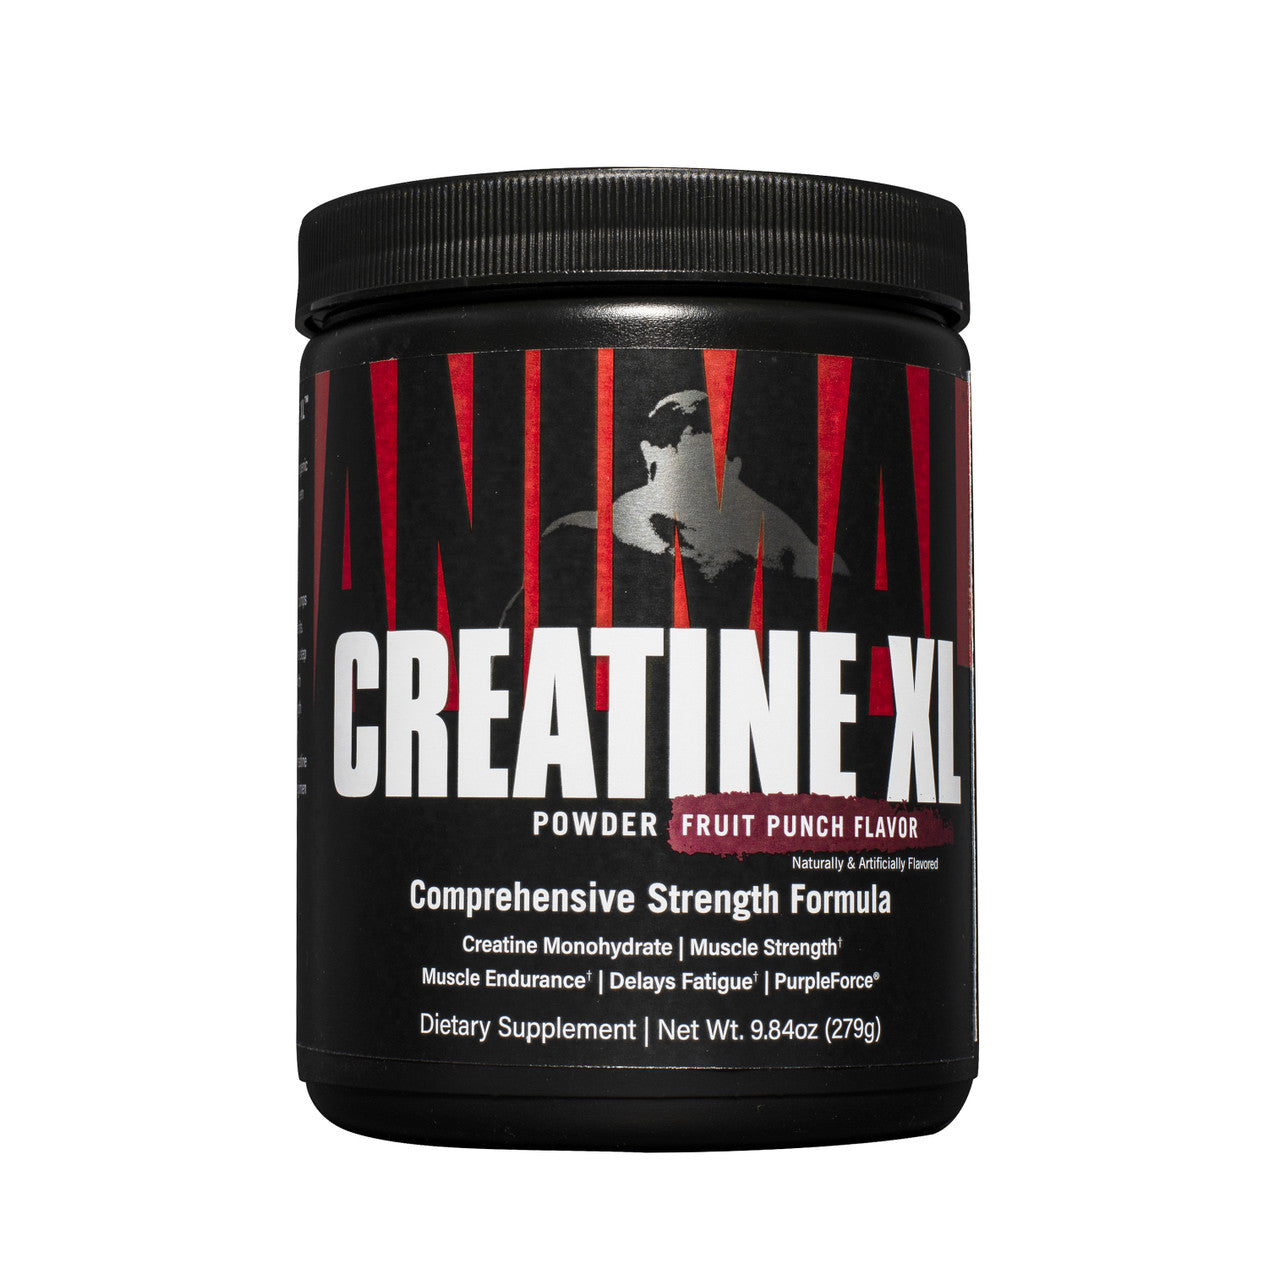 Animal Creatine XL - A1 Supplements Store